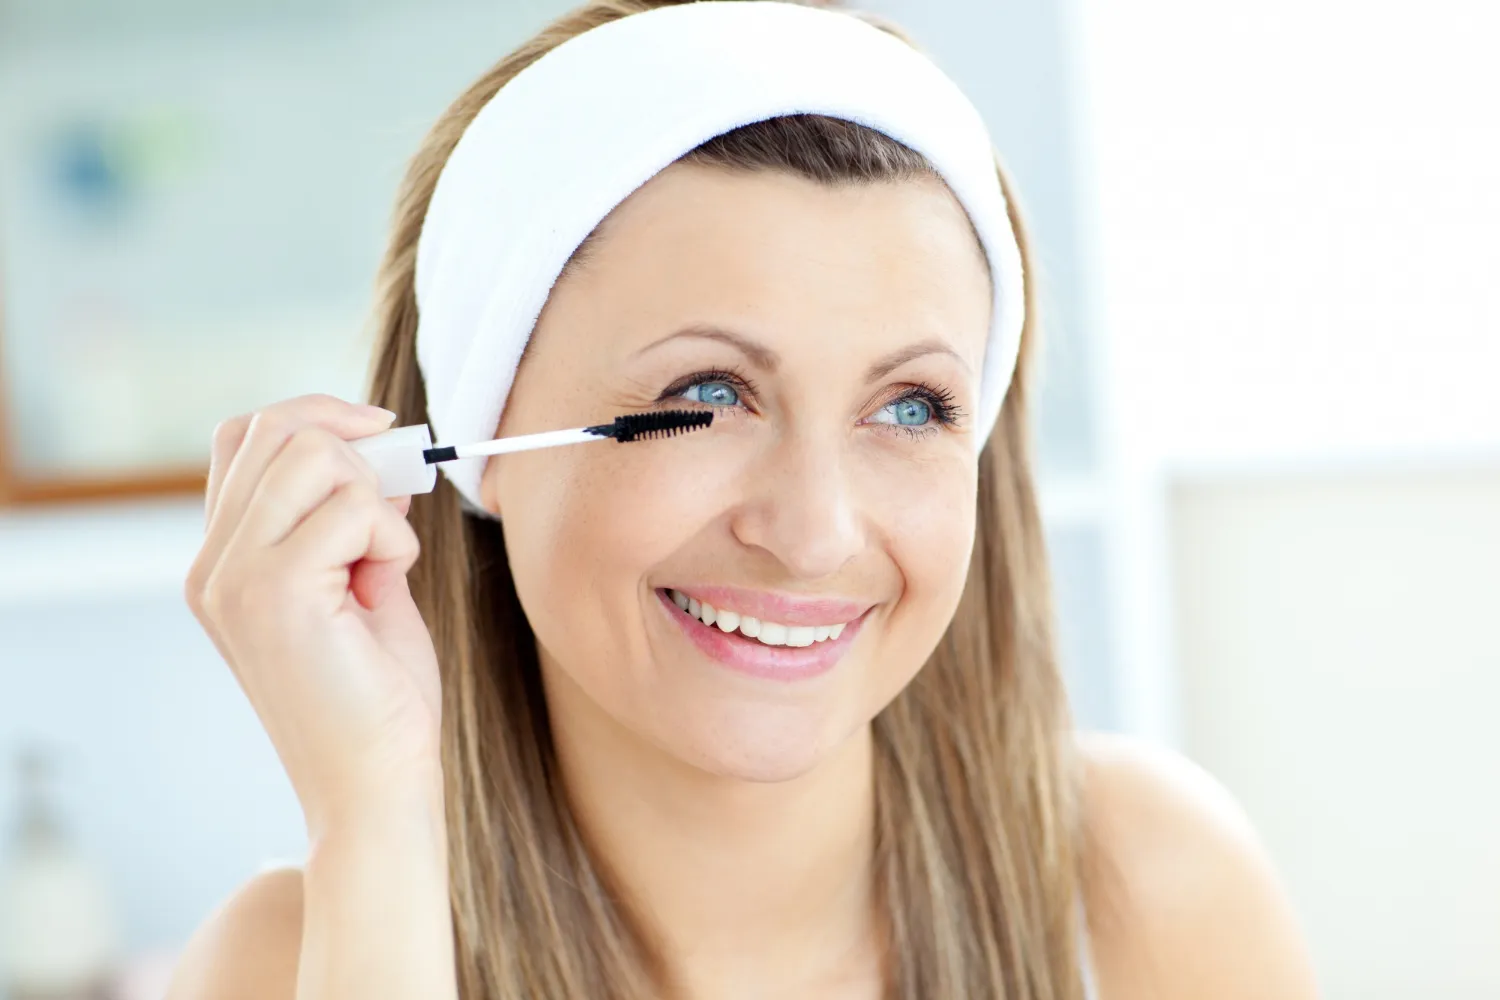 Aftercare Tips for Eyebrow Threading